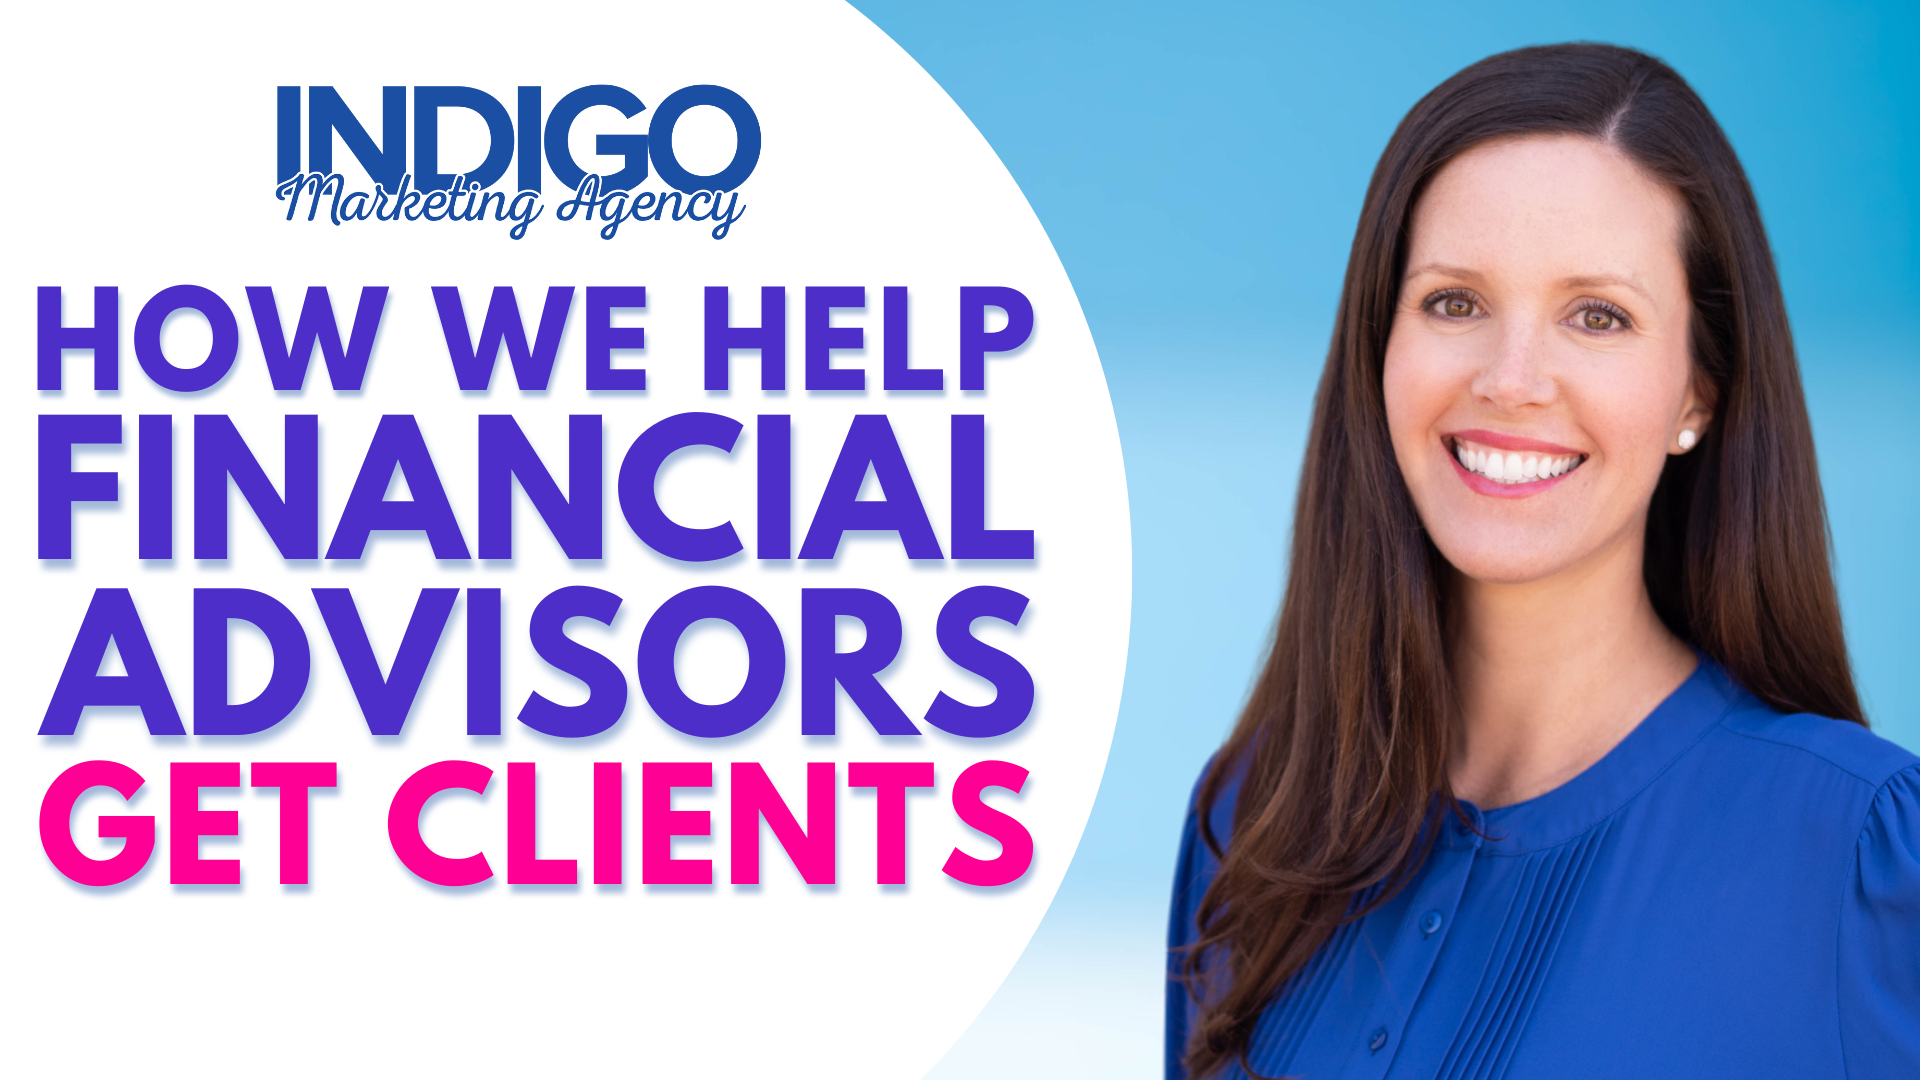 How we help financial advisors get clients